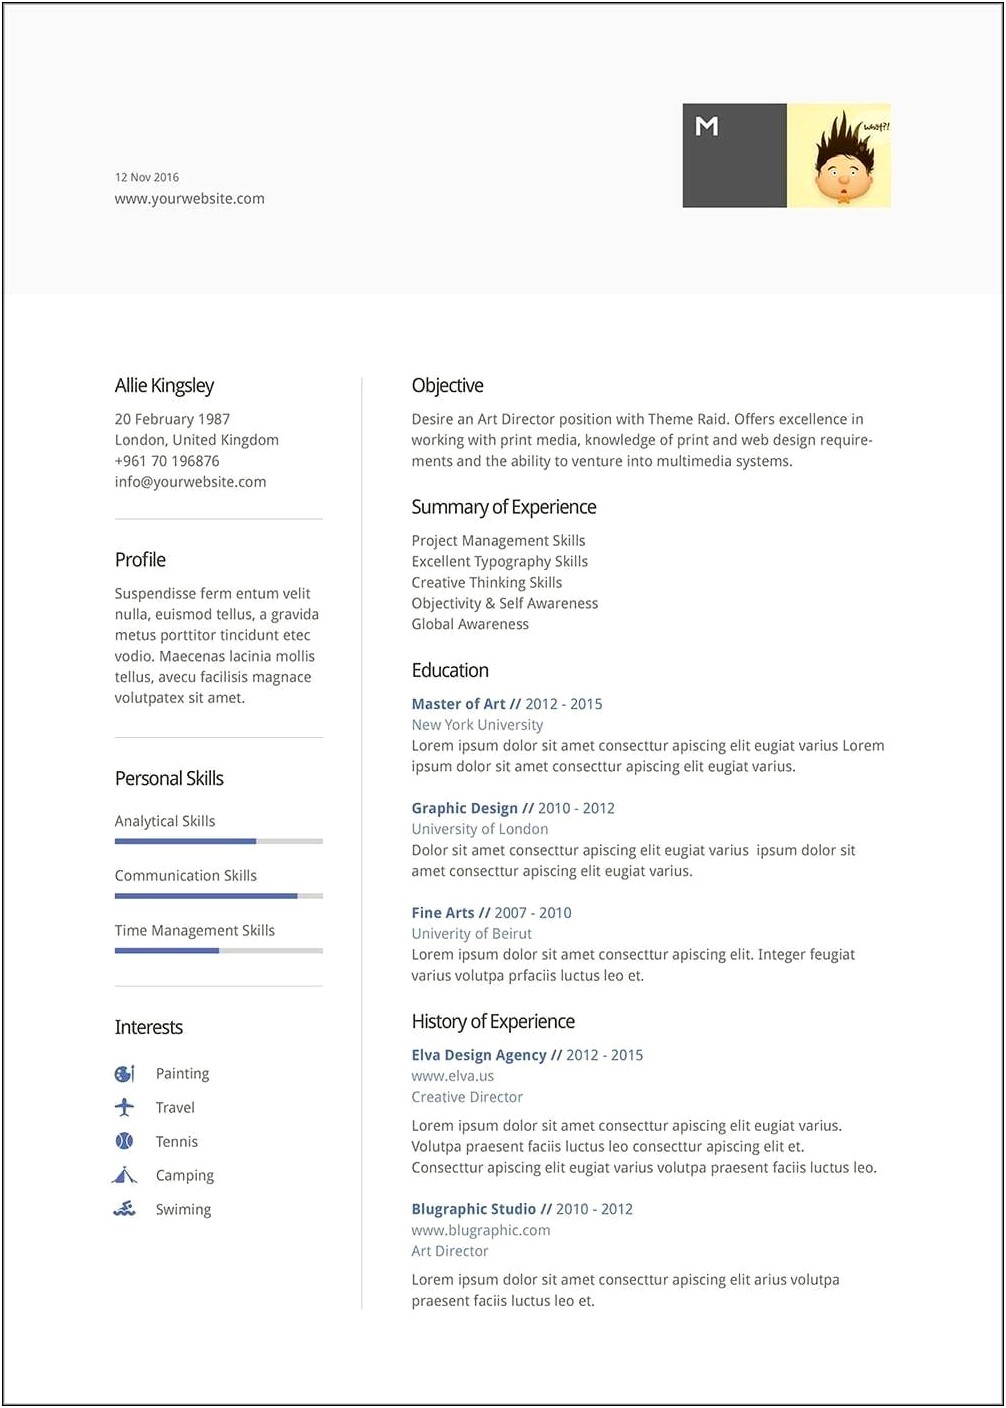 Download Sample Resume Format In Word Document